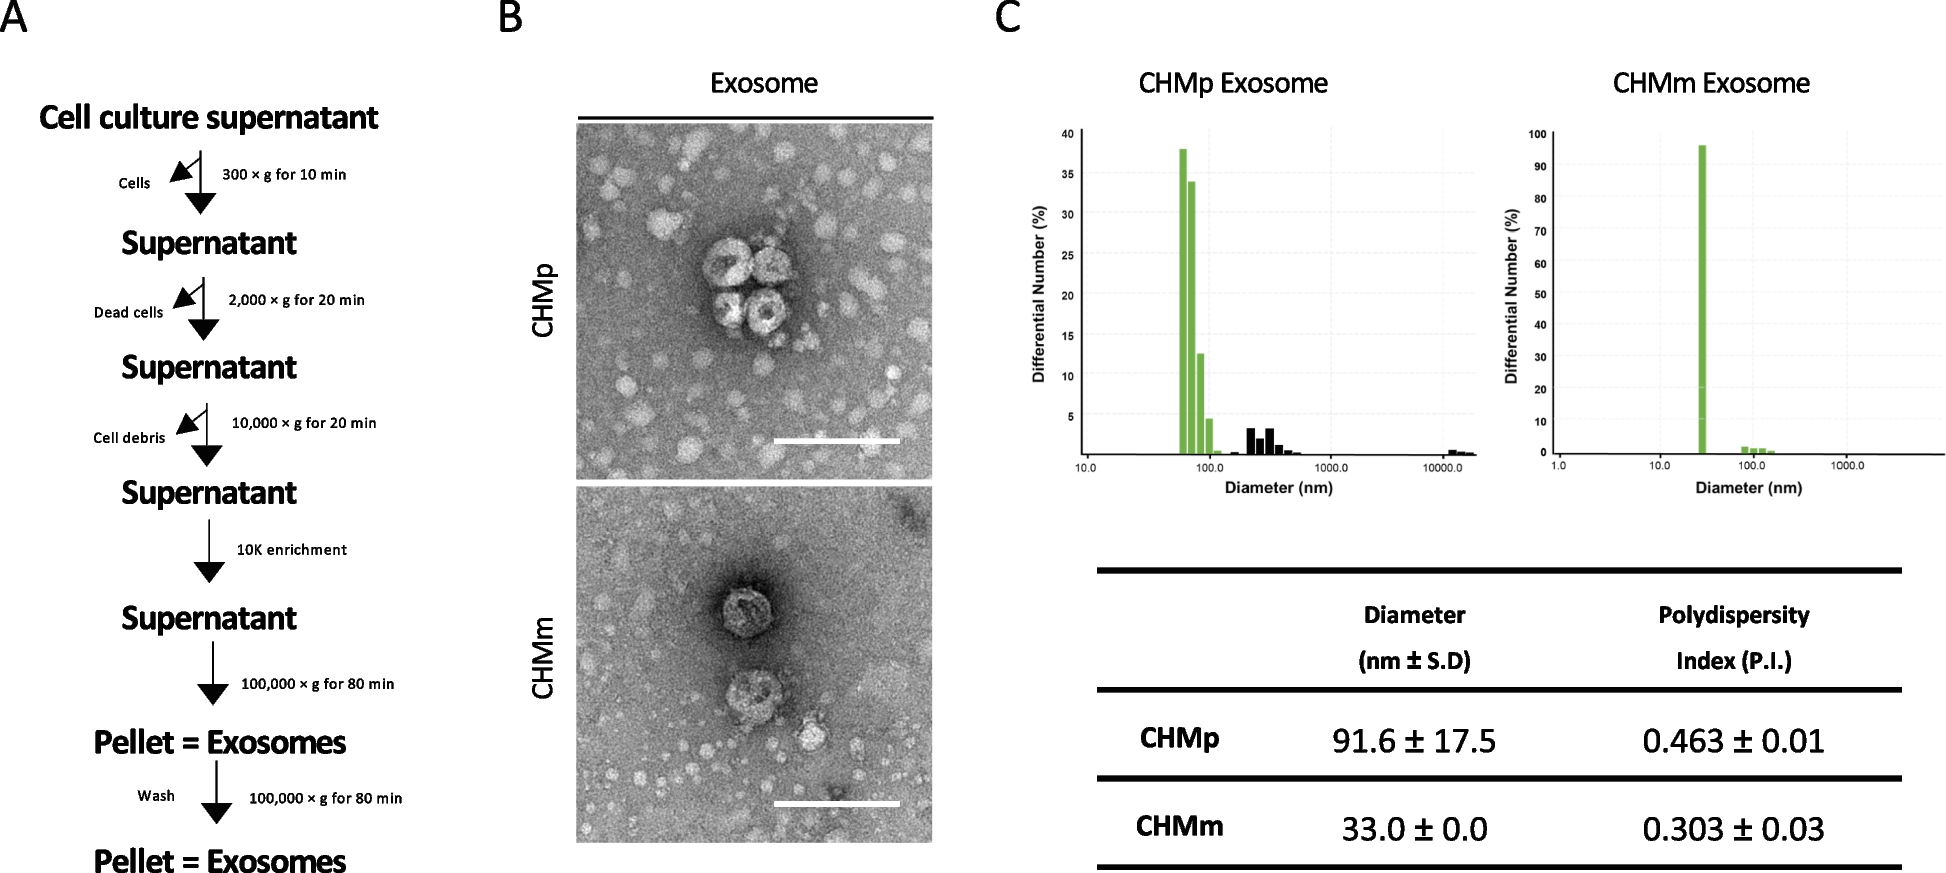 Exosome proteomes reveal glycolysis-related enzyme enrichment in primary canine mammary gland tumor compared to metastases